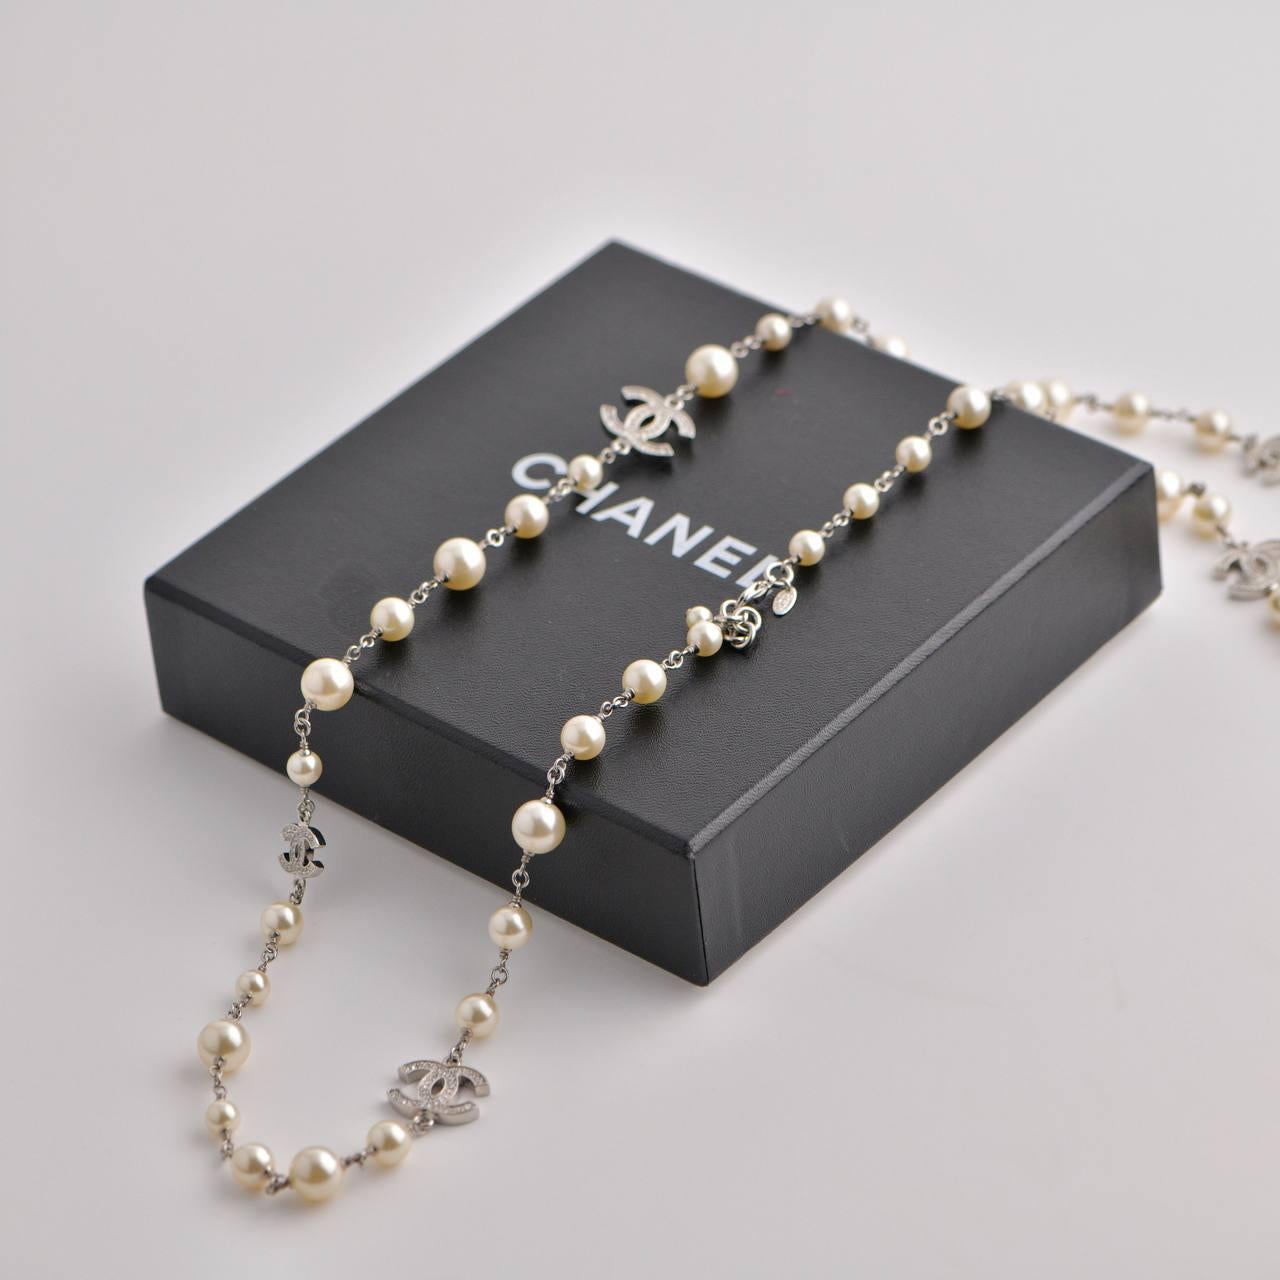 SKU	AT-2177
Comes With	Box Only
Date	Approx 2010
Model	CC Necklace
Serial Number	10A
Metal	Gilt
Stones	Glass Pearls
Weight	92.5 g
Length	107 cm
Condition	Excellent
__________________________________
If you are interested in any of our previously